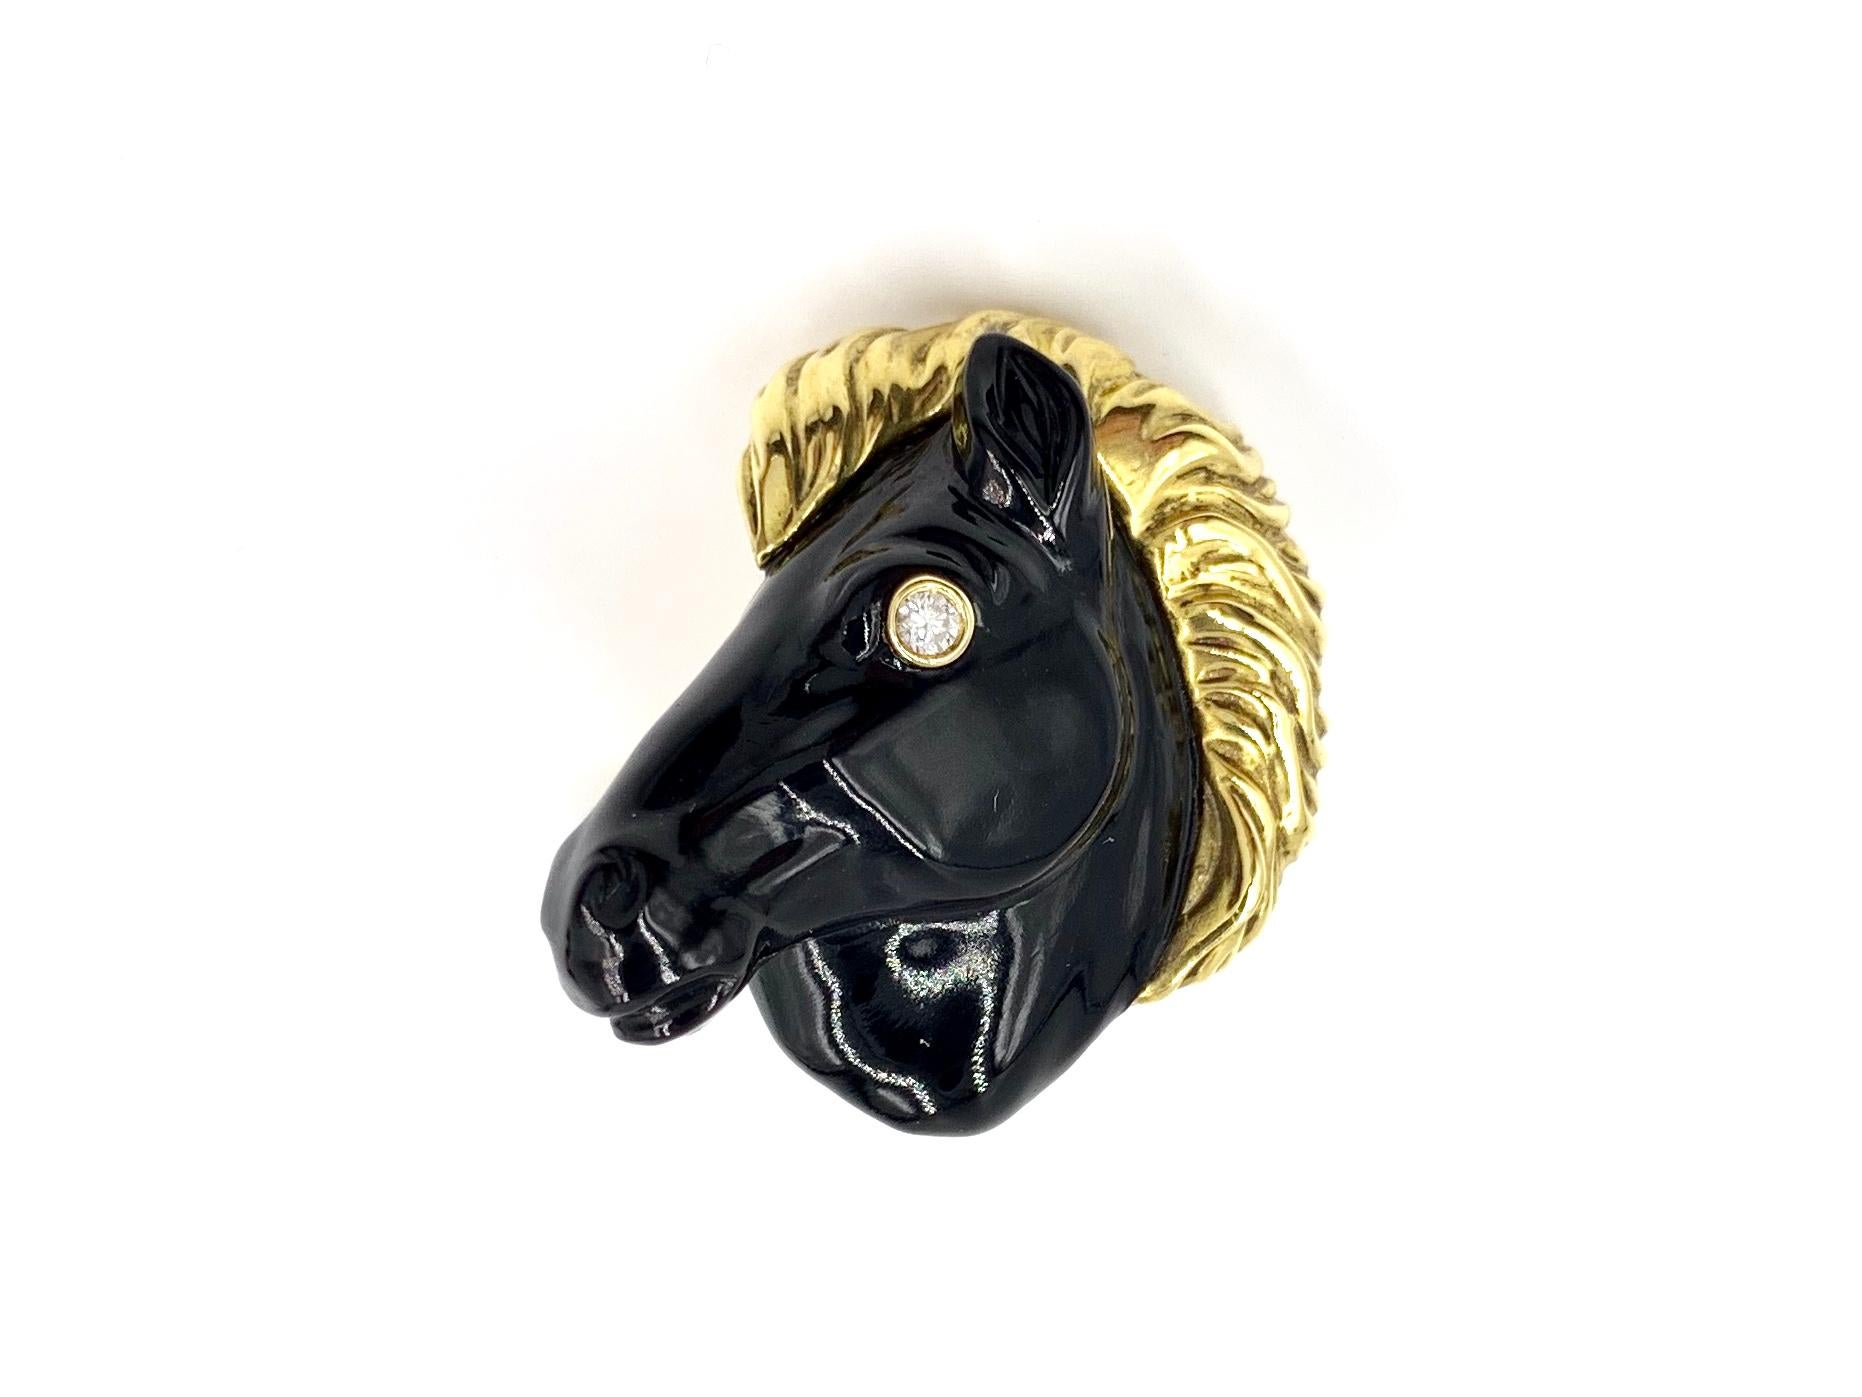 Handsome statement 18 karat horse head cuff links, expertly crafted by George Gero. Each cuff link features a detailed and smooth carved onyx horse head with a yellow gold flowing mane and a single round diamond eye. Diamond total weight is .06